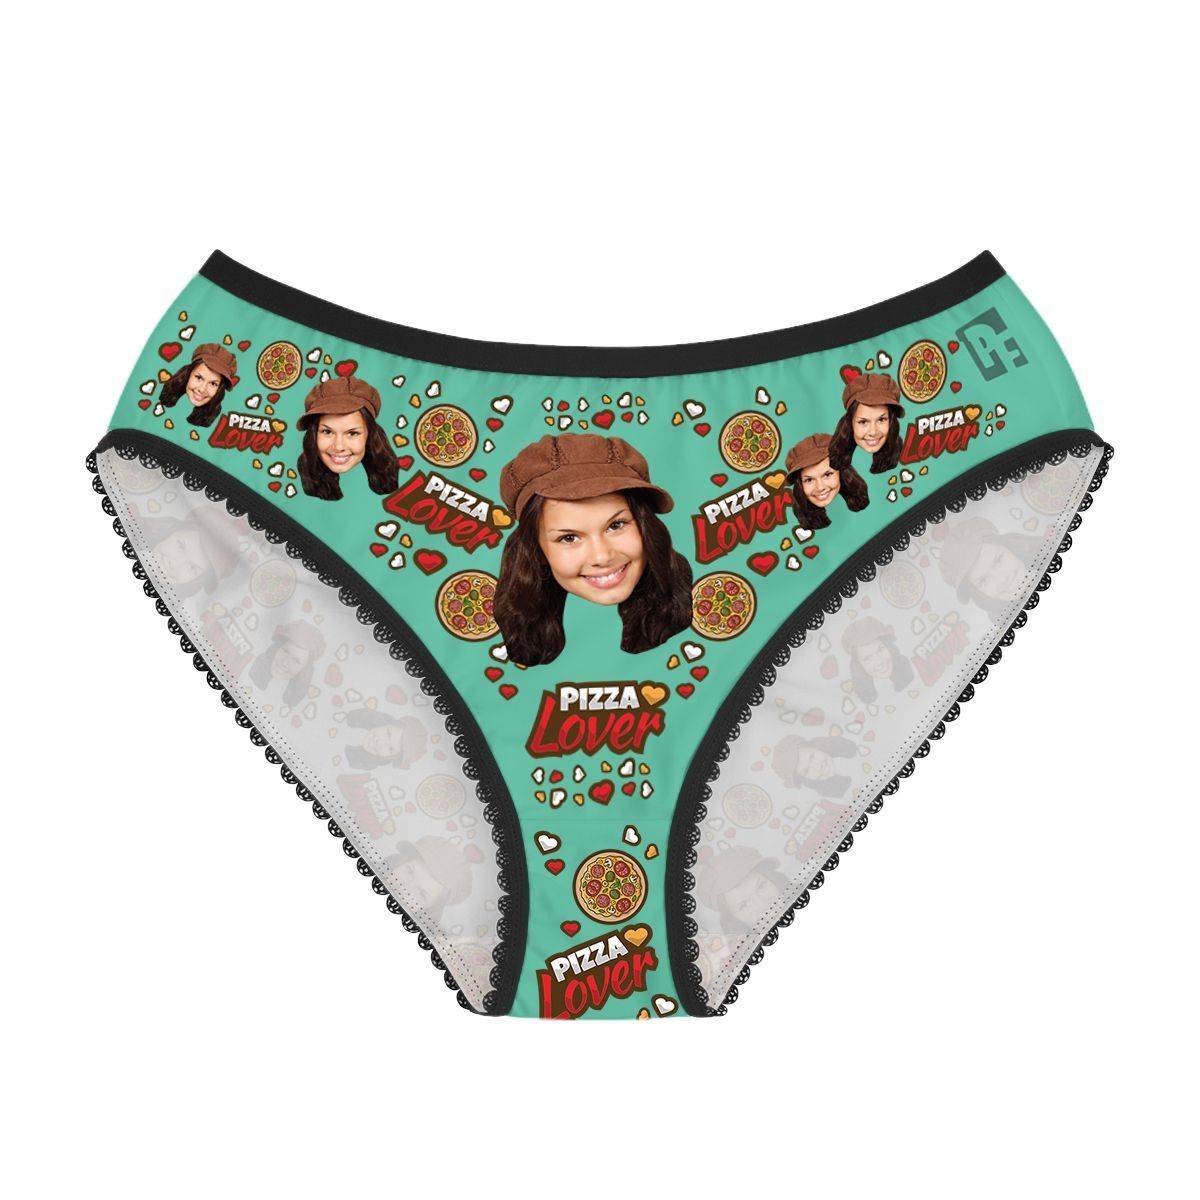 Mint Pizza Lover women's underwear briefs personalized with photo printed on them